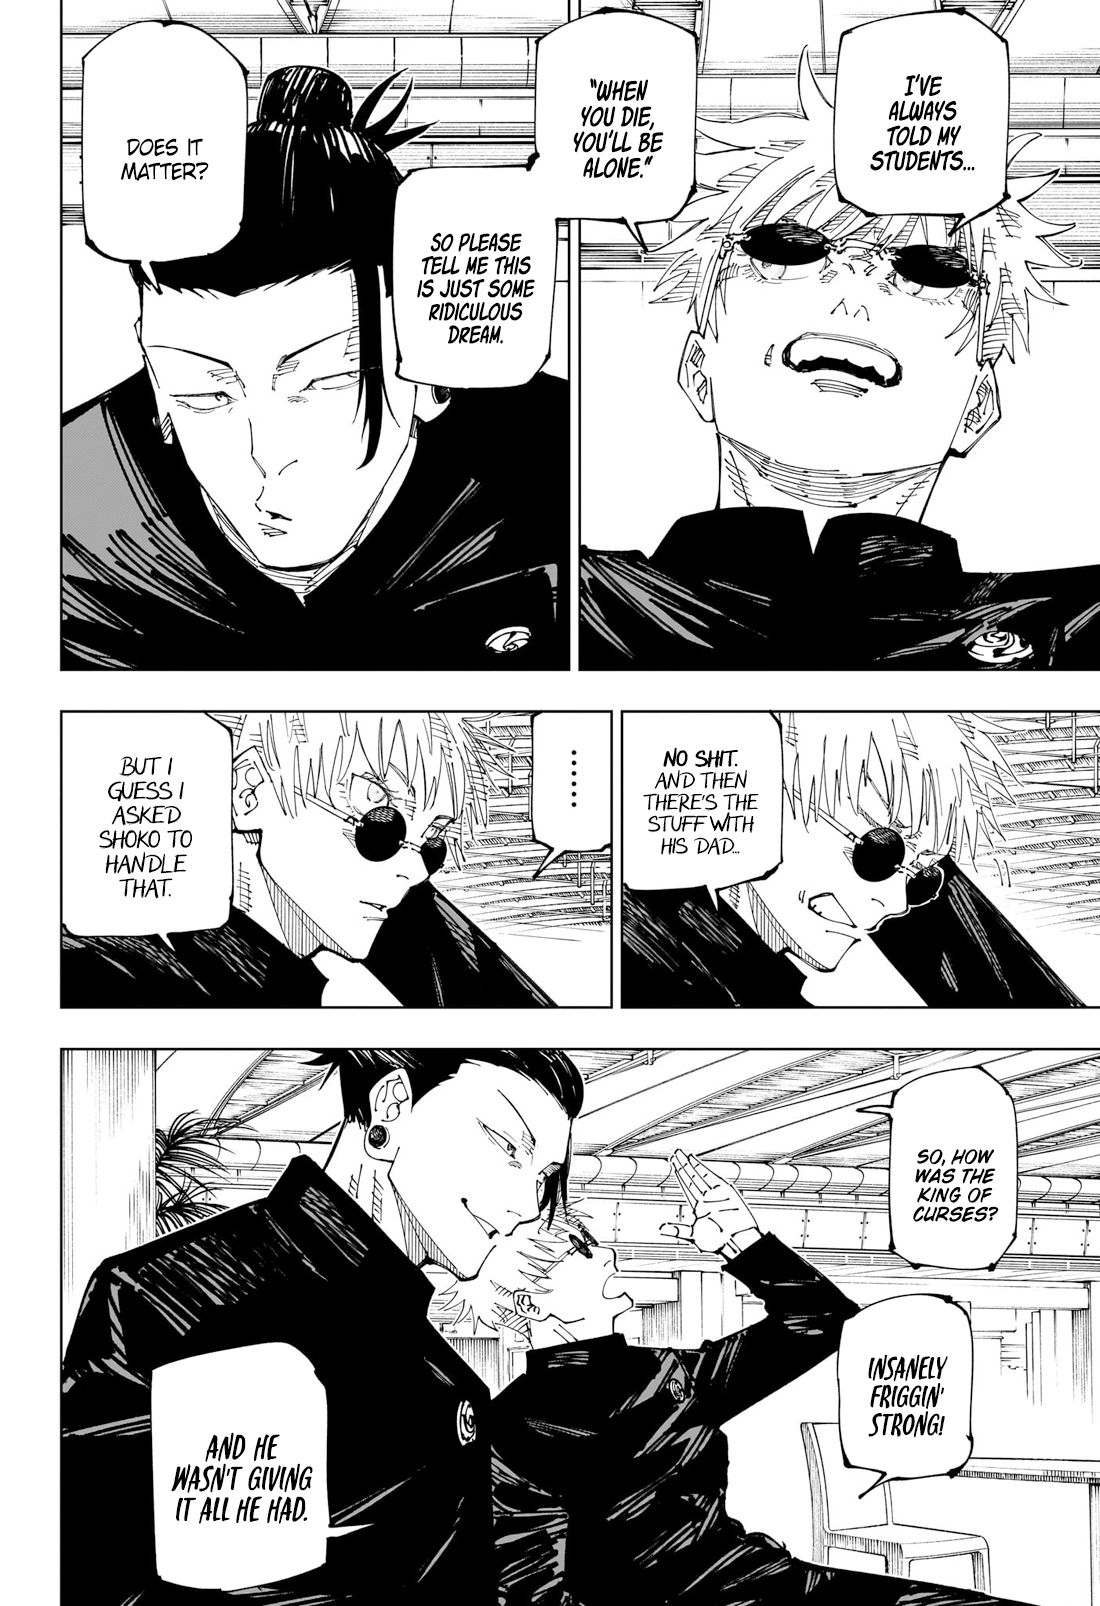 Jujutsu Kaisen, Chapter 236  TcbScans Org - Free Manga Online in High  Quality